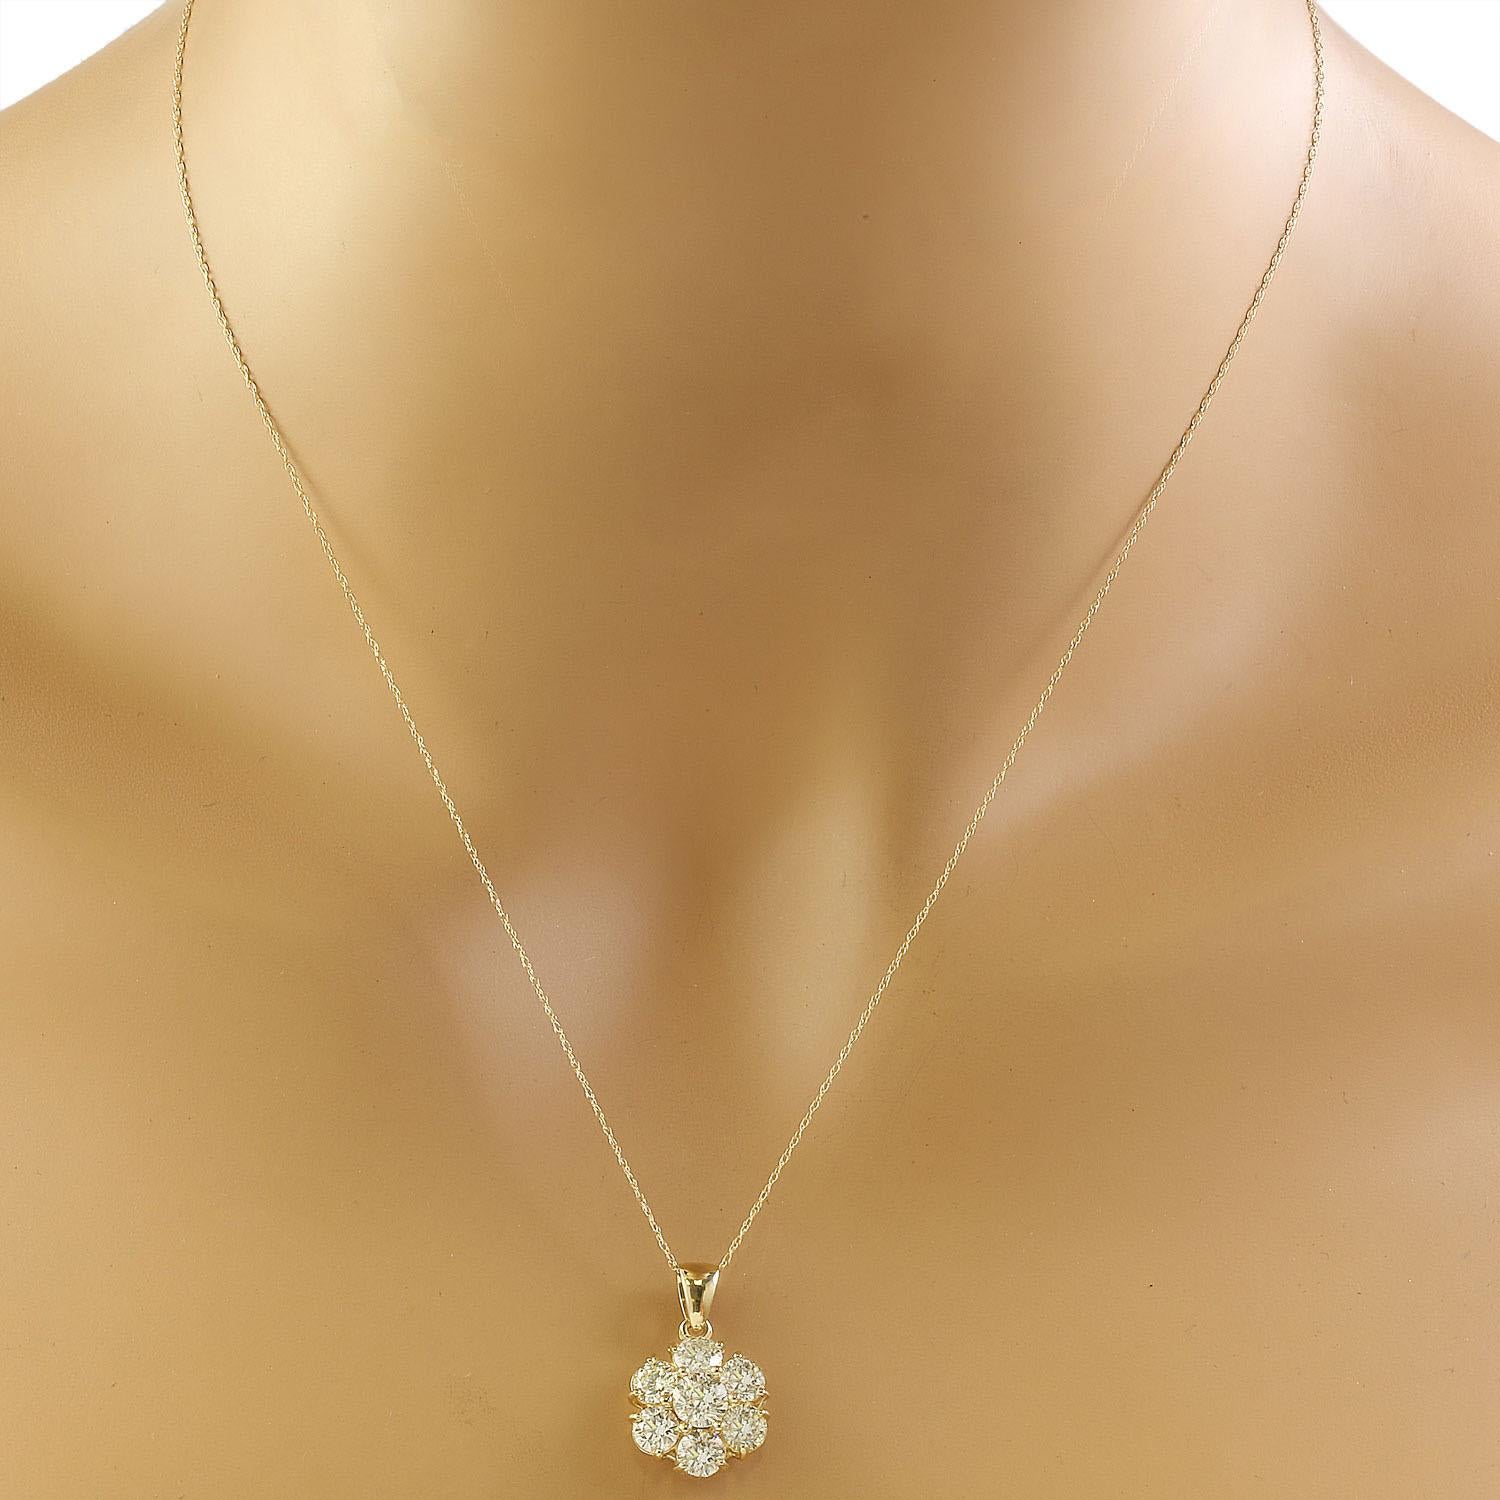 Modern Exquisite Natural Diamond Necklace In 14 Karat White Gold  For Sale